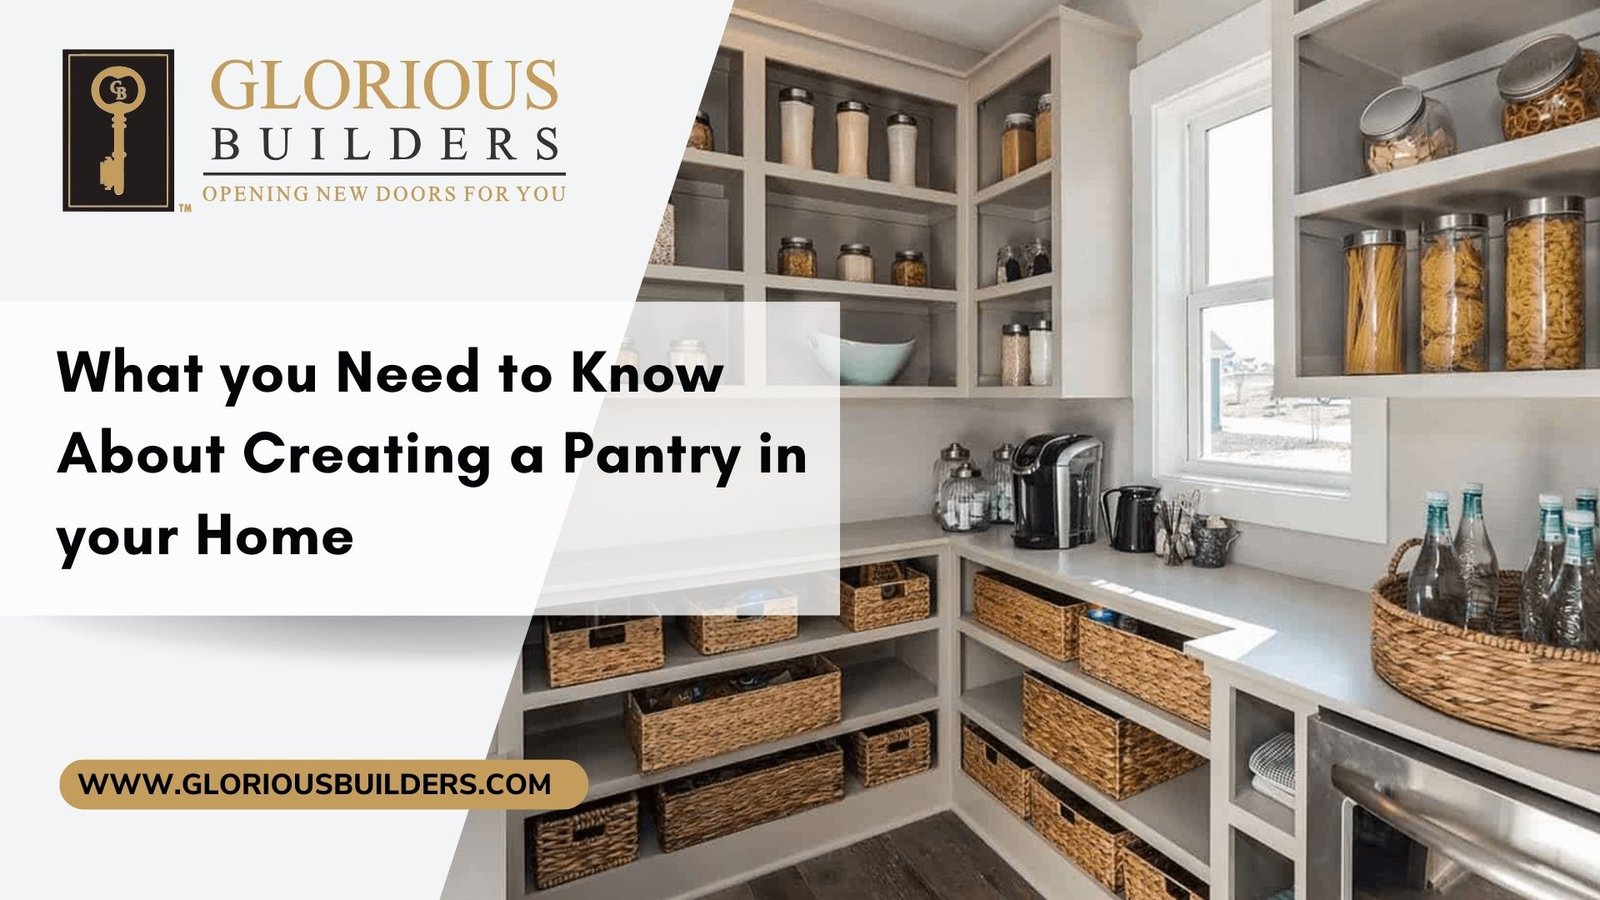 What you Need to Know About Creating a Pantry in your Home